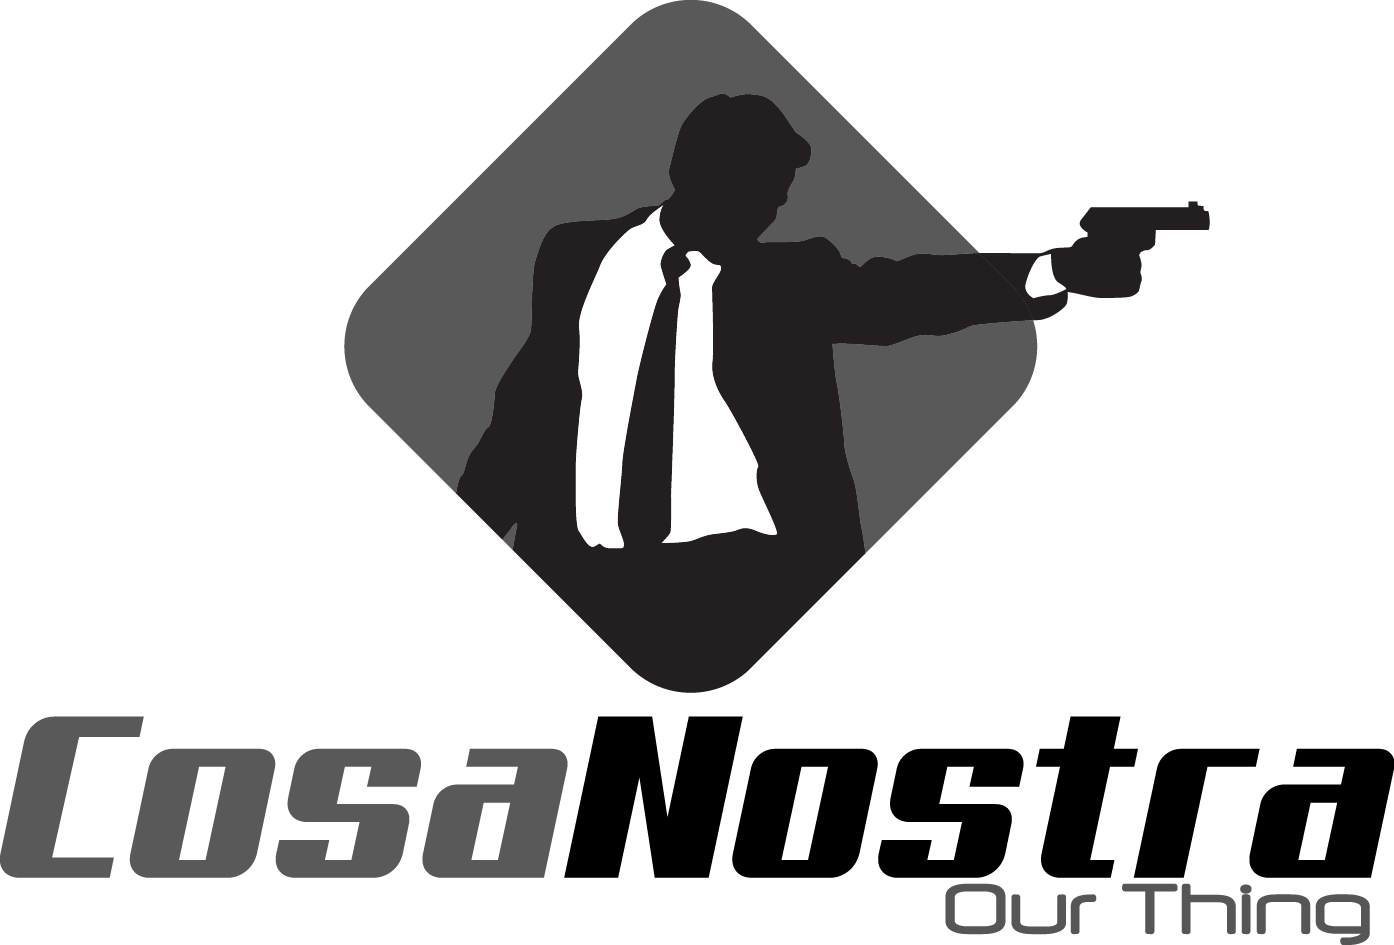 Mobster Logo - List of Synonyms and Antonyms of the Word: Mobster Logo